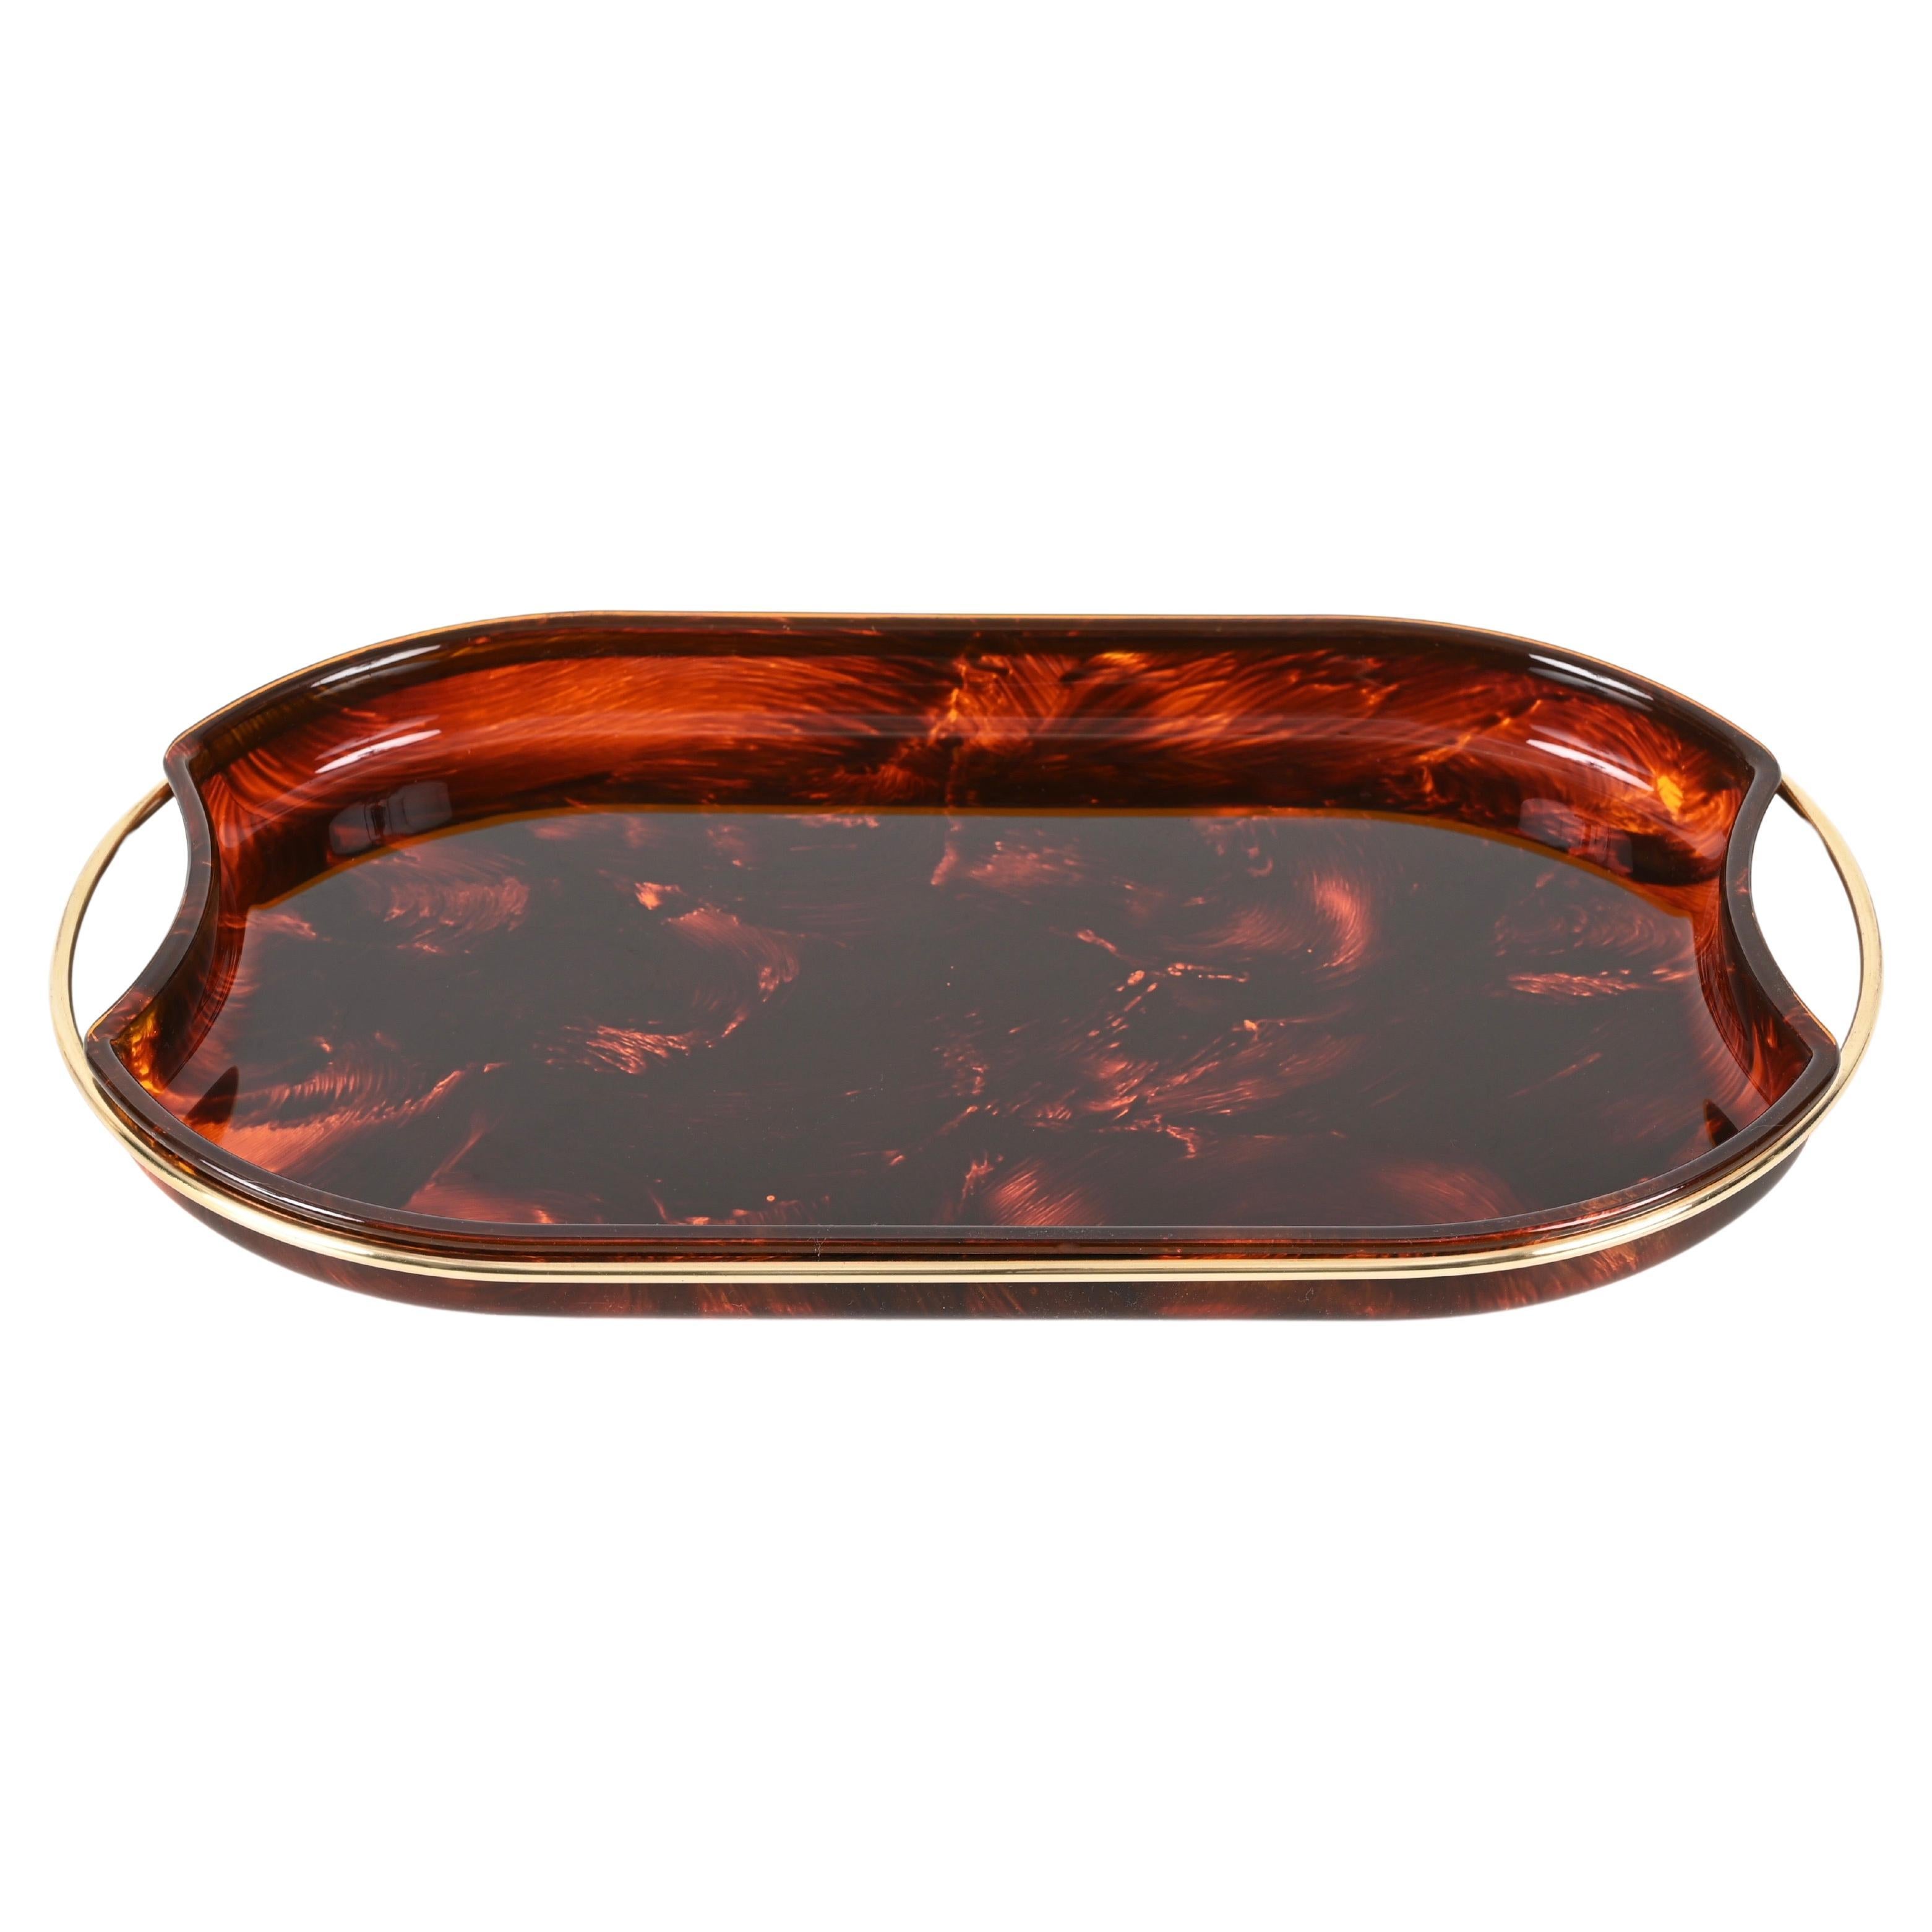 Midcentury Modern By Guzzini Italian Lucite and Brass Oval Serving Tray, 1970s For Sale